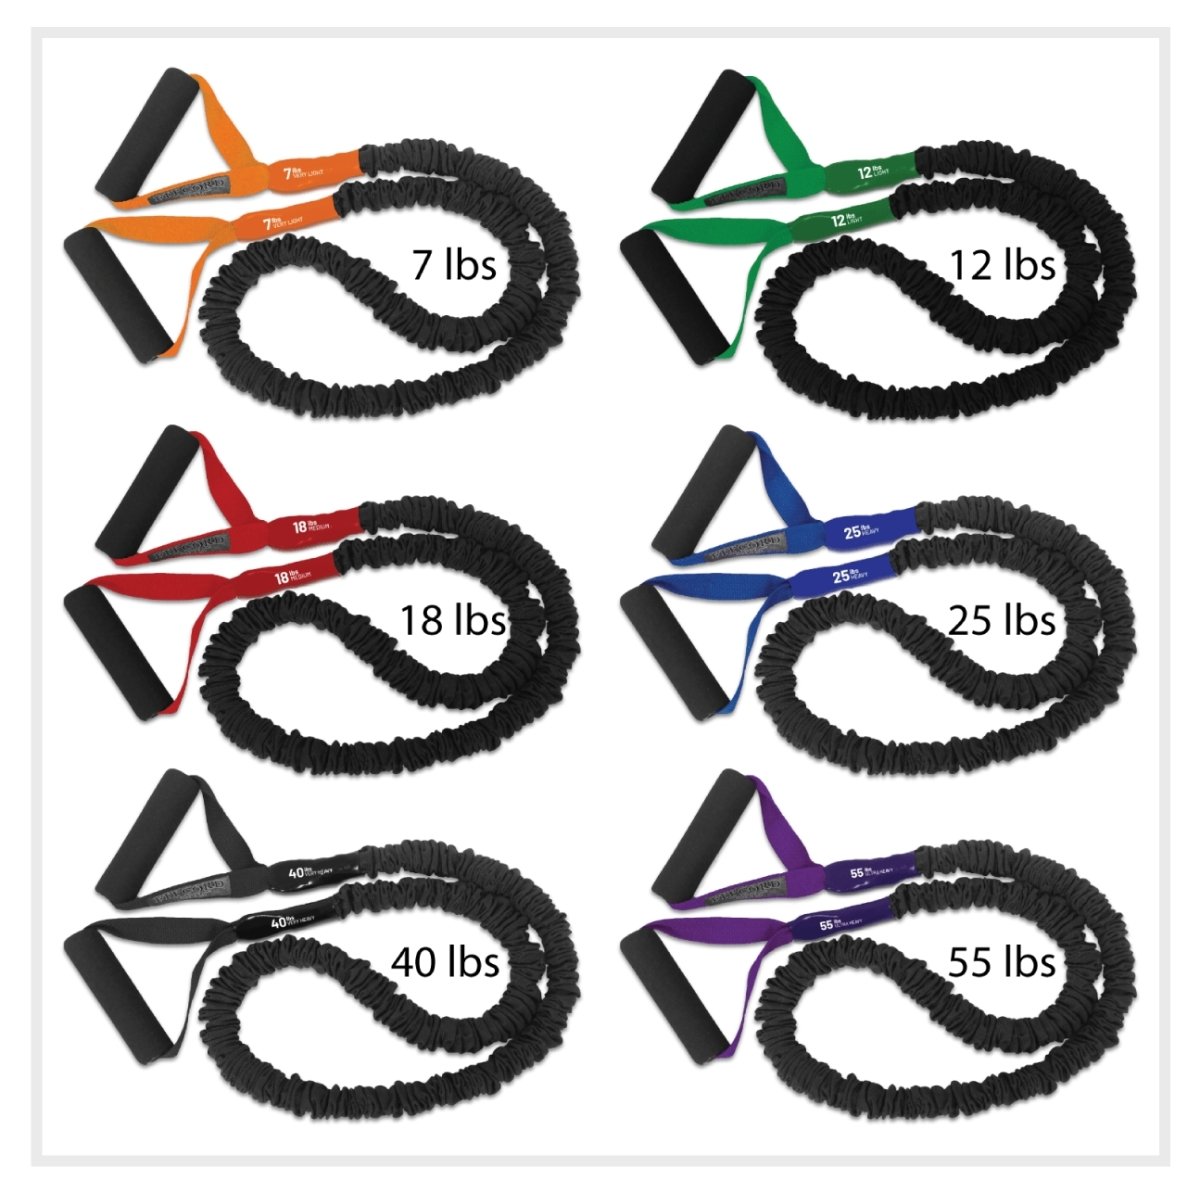 American made resistance bands for tension workouts. Safe covered heavy duty bands with 2 padded handles. great for at home workouts or in gym, box or personal training